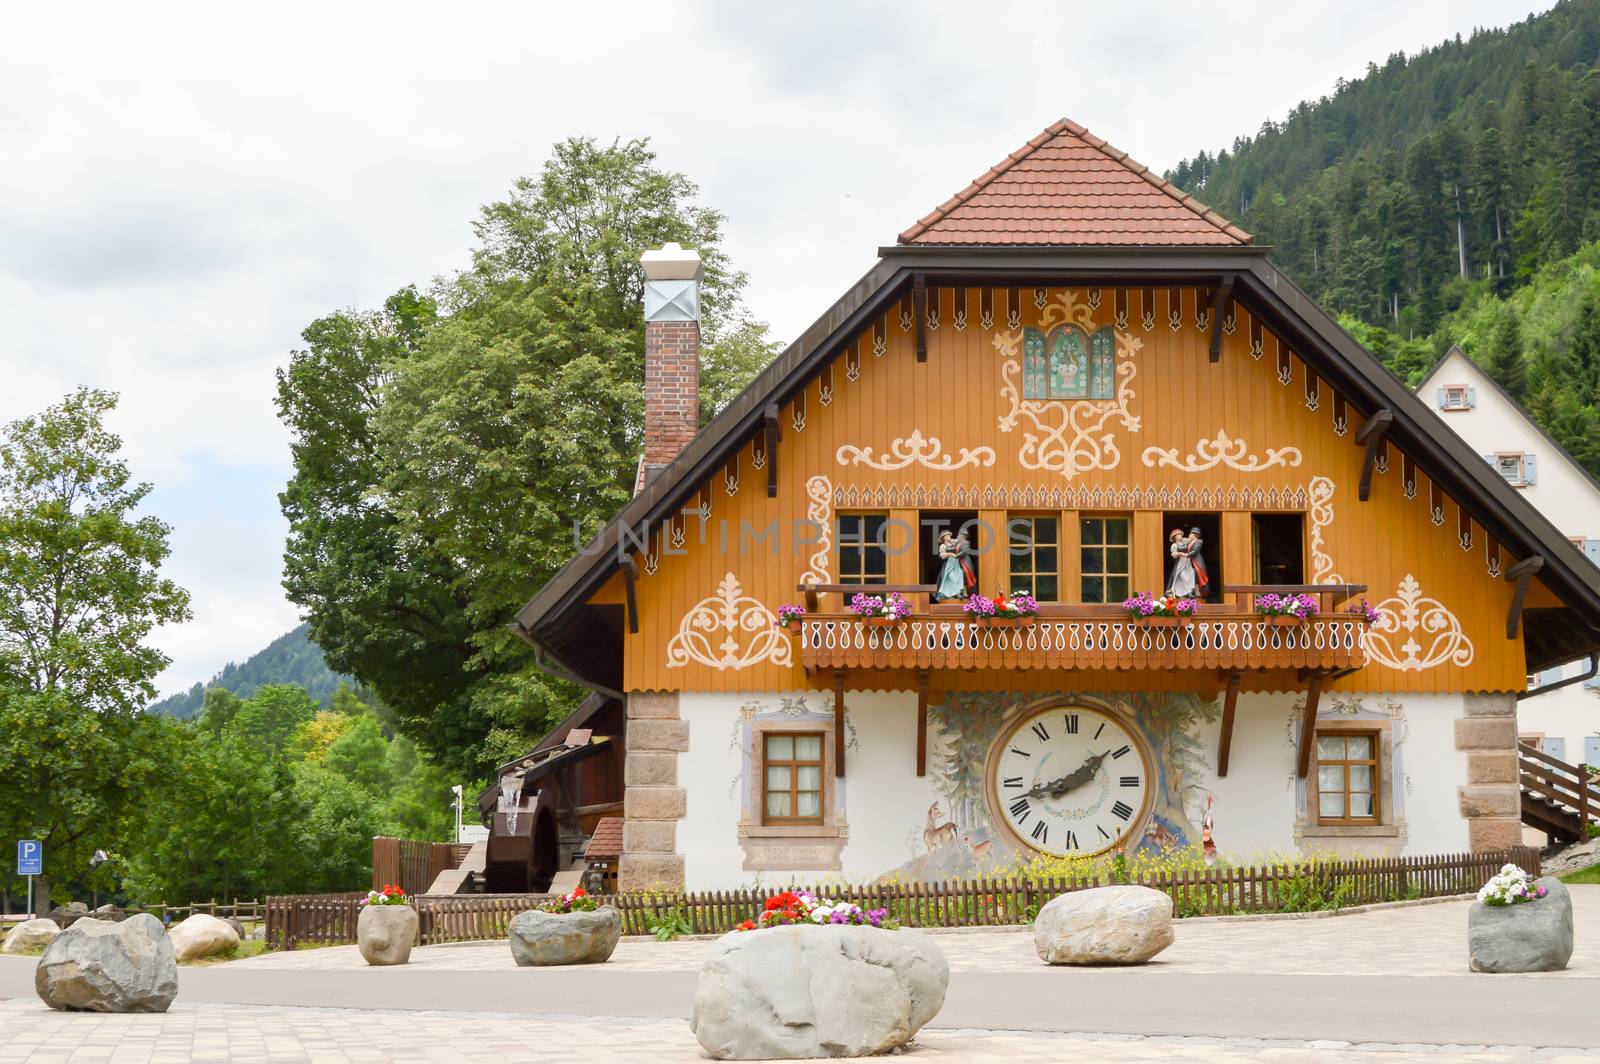 House of the Hofgut Sternen cuckoo in the black forest in Germany